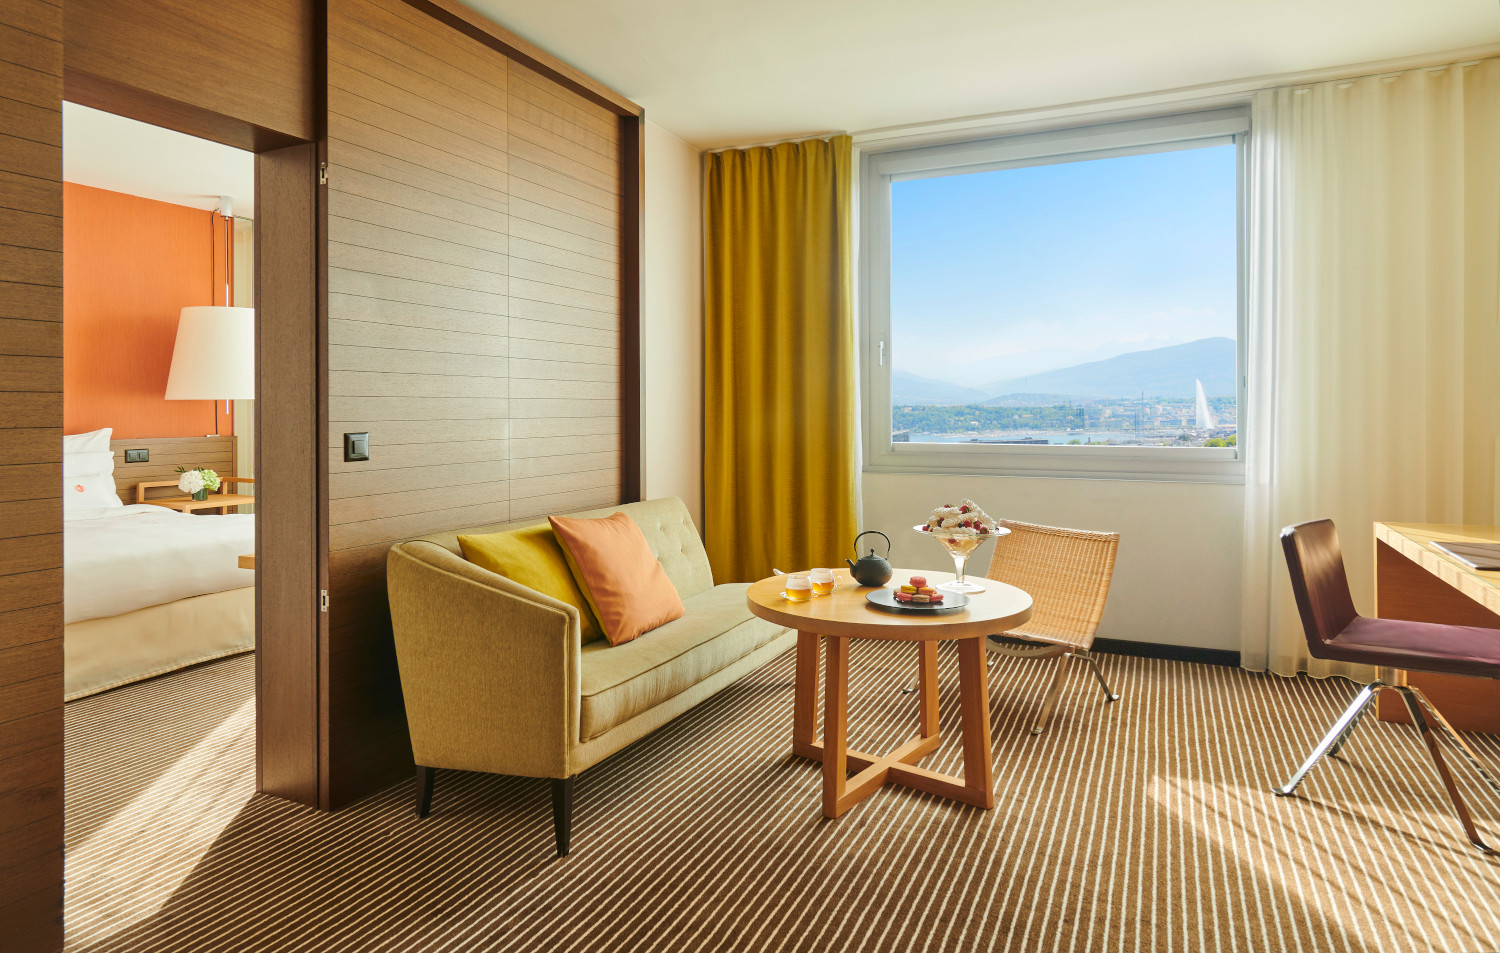 InterContinental-Geneve-One Bedroom-Room-Lake-view-and-tea